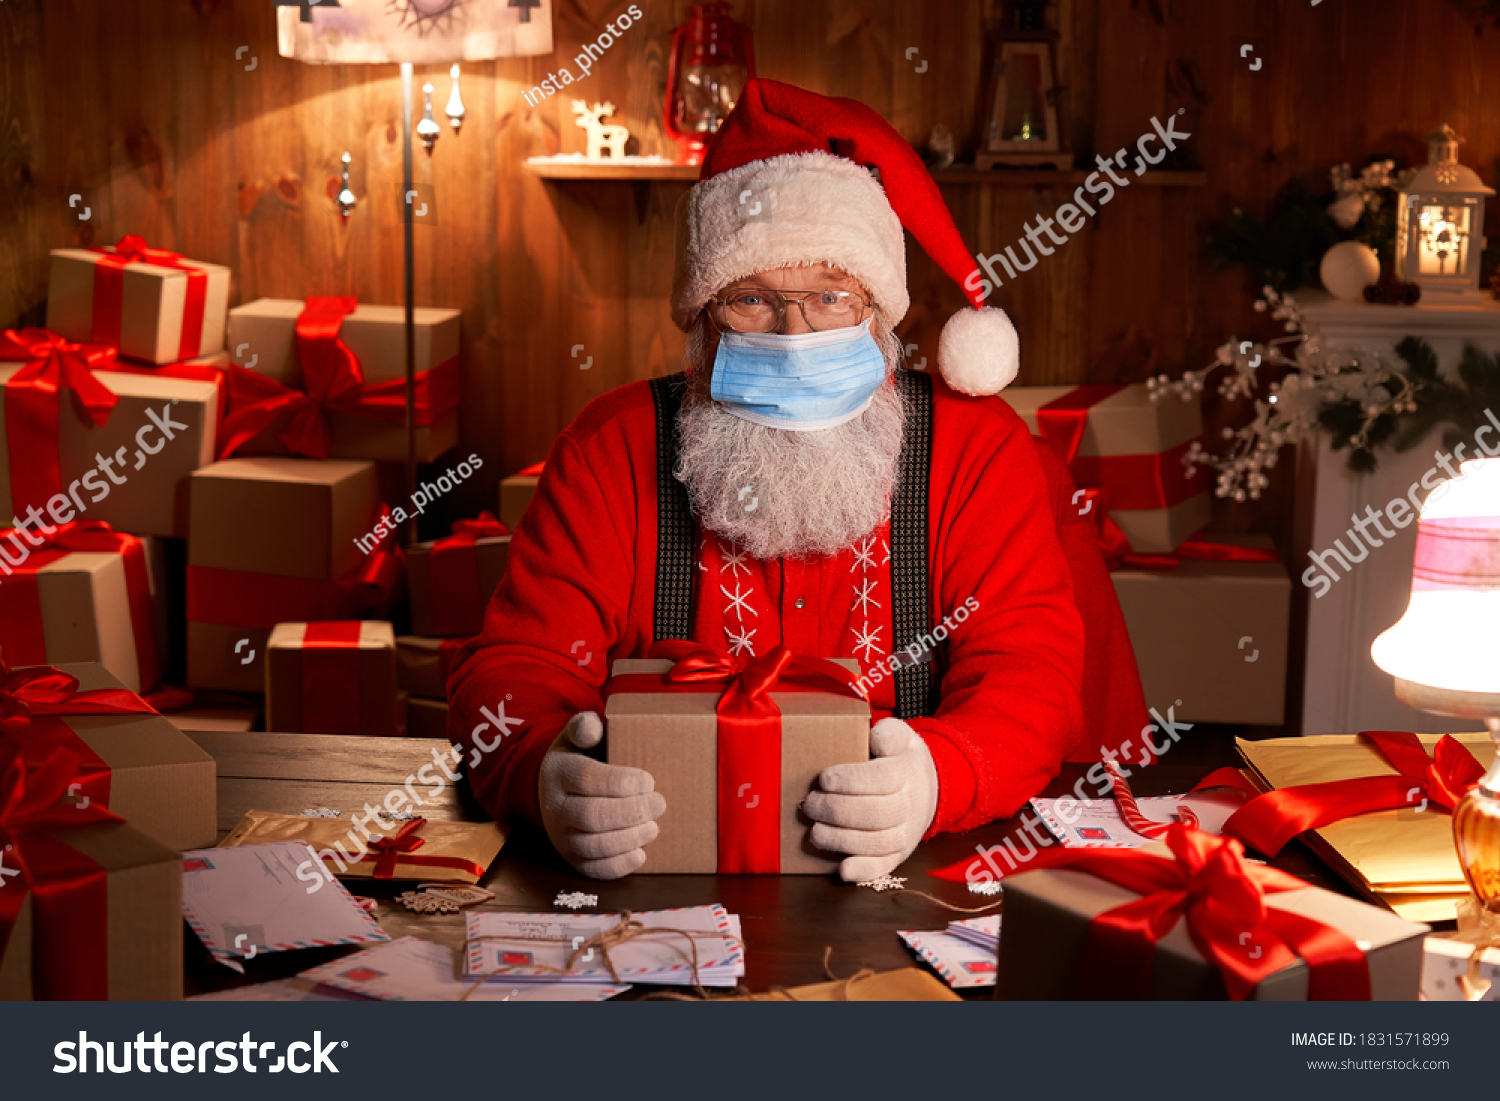 Old funny bearded Santa Claus wearing face mask, holding gift box preparing for xmas eve sitting at cozy home table late in night with presents. Merry Christmas Covid 19 coronavirus safe delivery. #1831571899